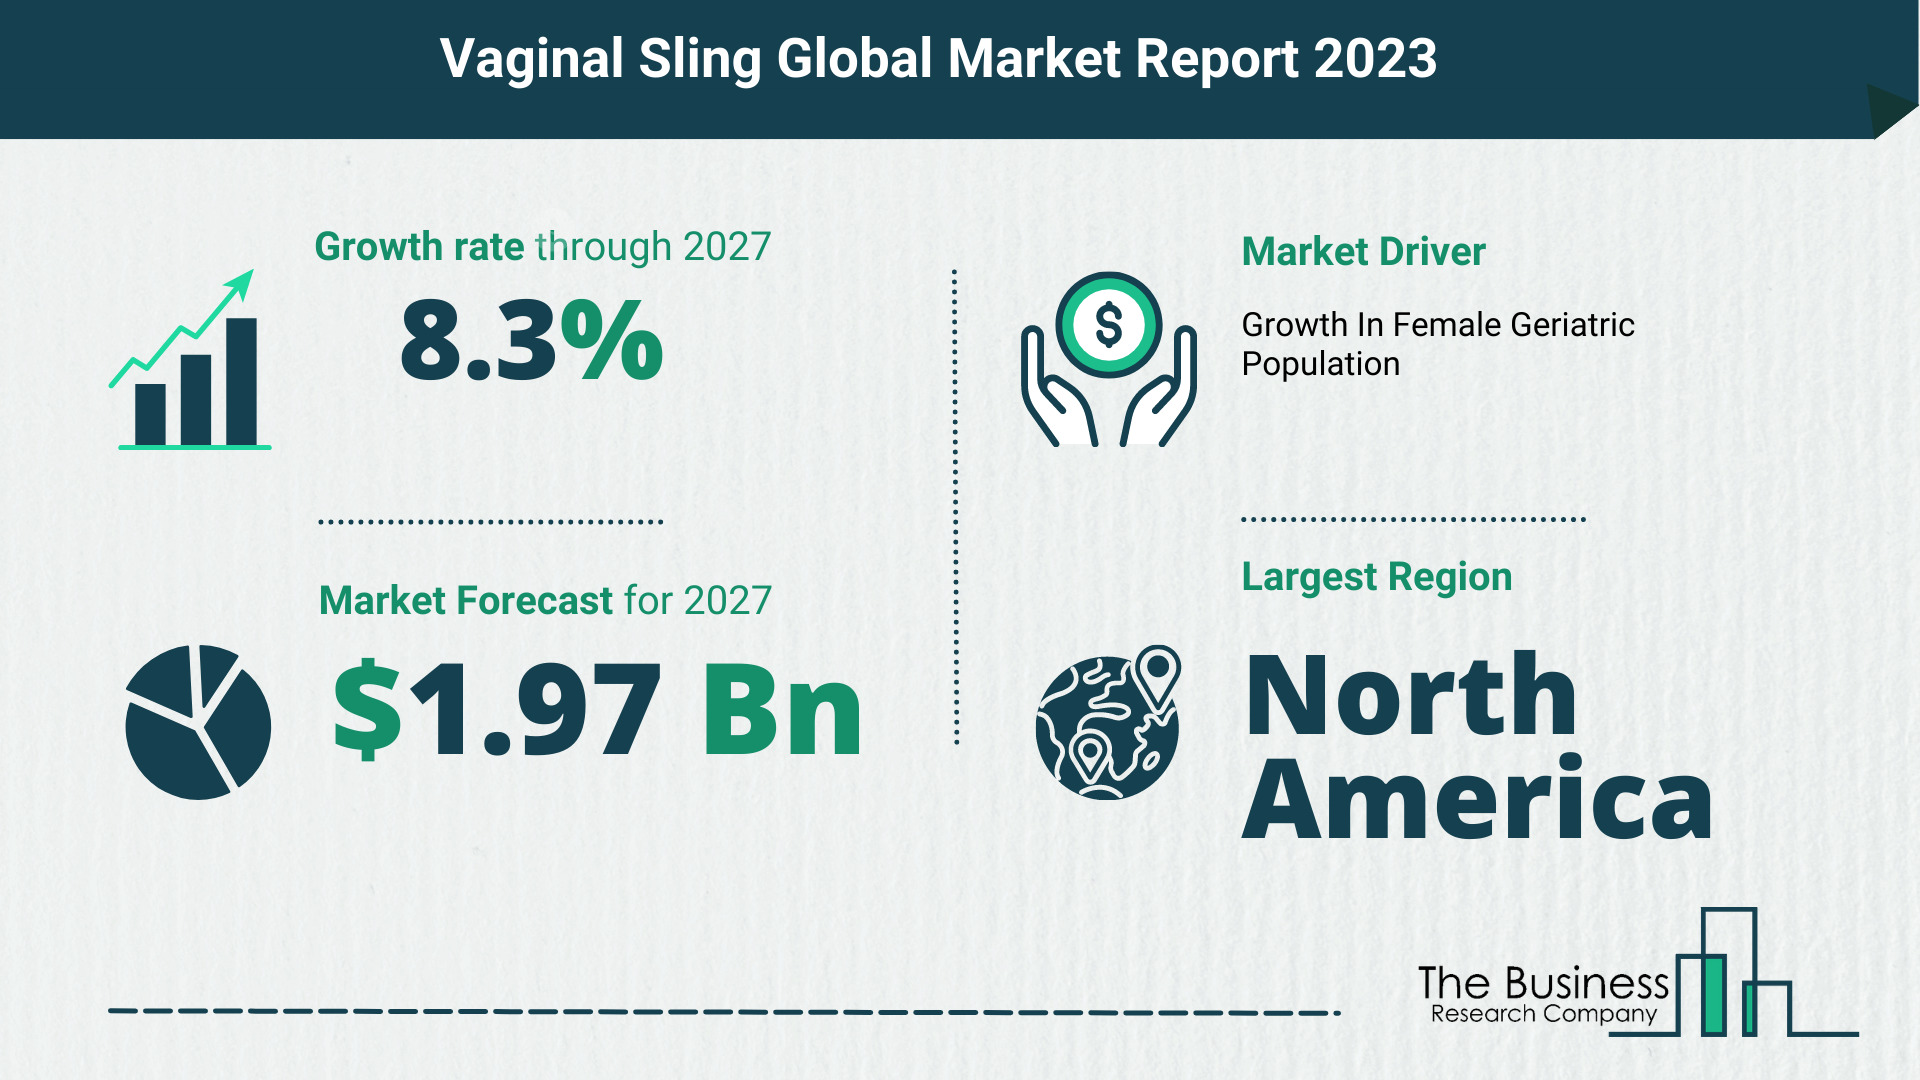 What Will The Vaginal Sling Market Look Like In 2023?